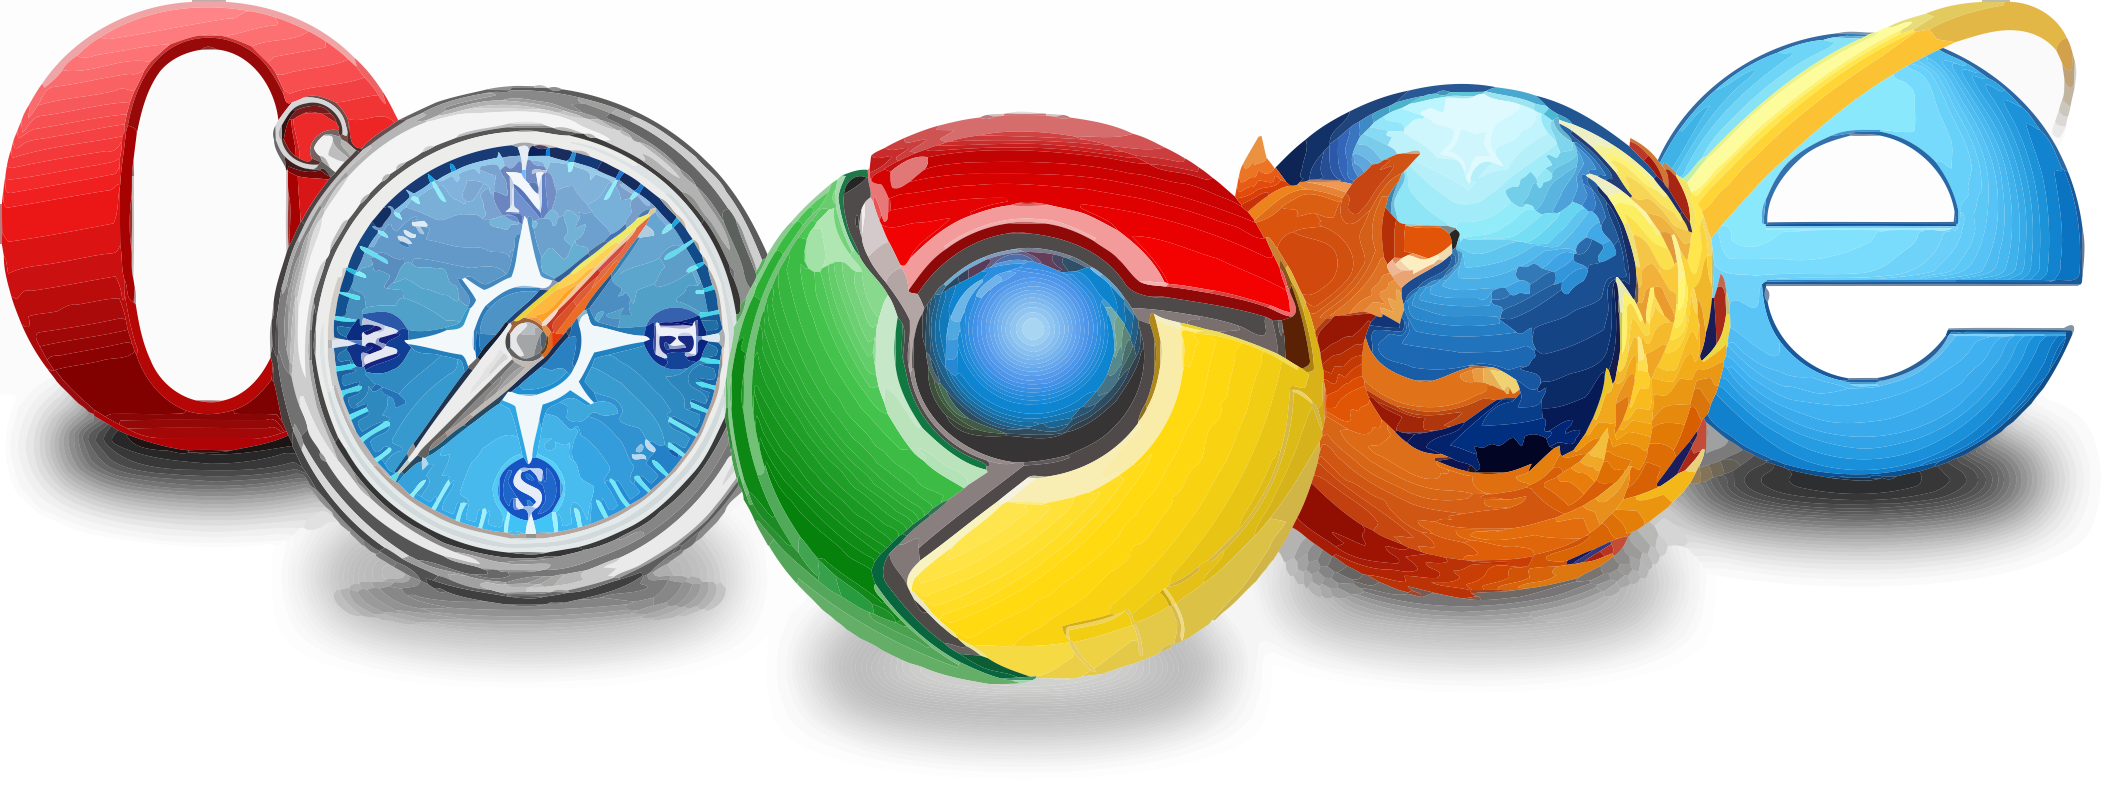 logos of different browsers